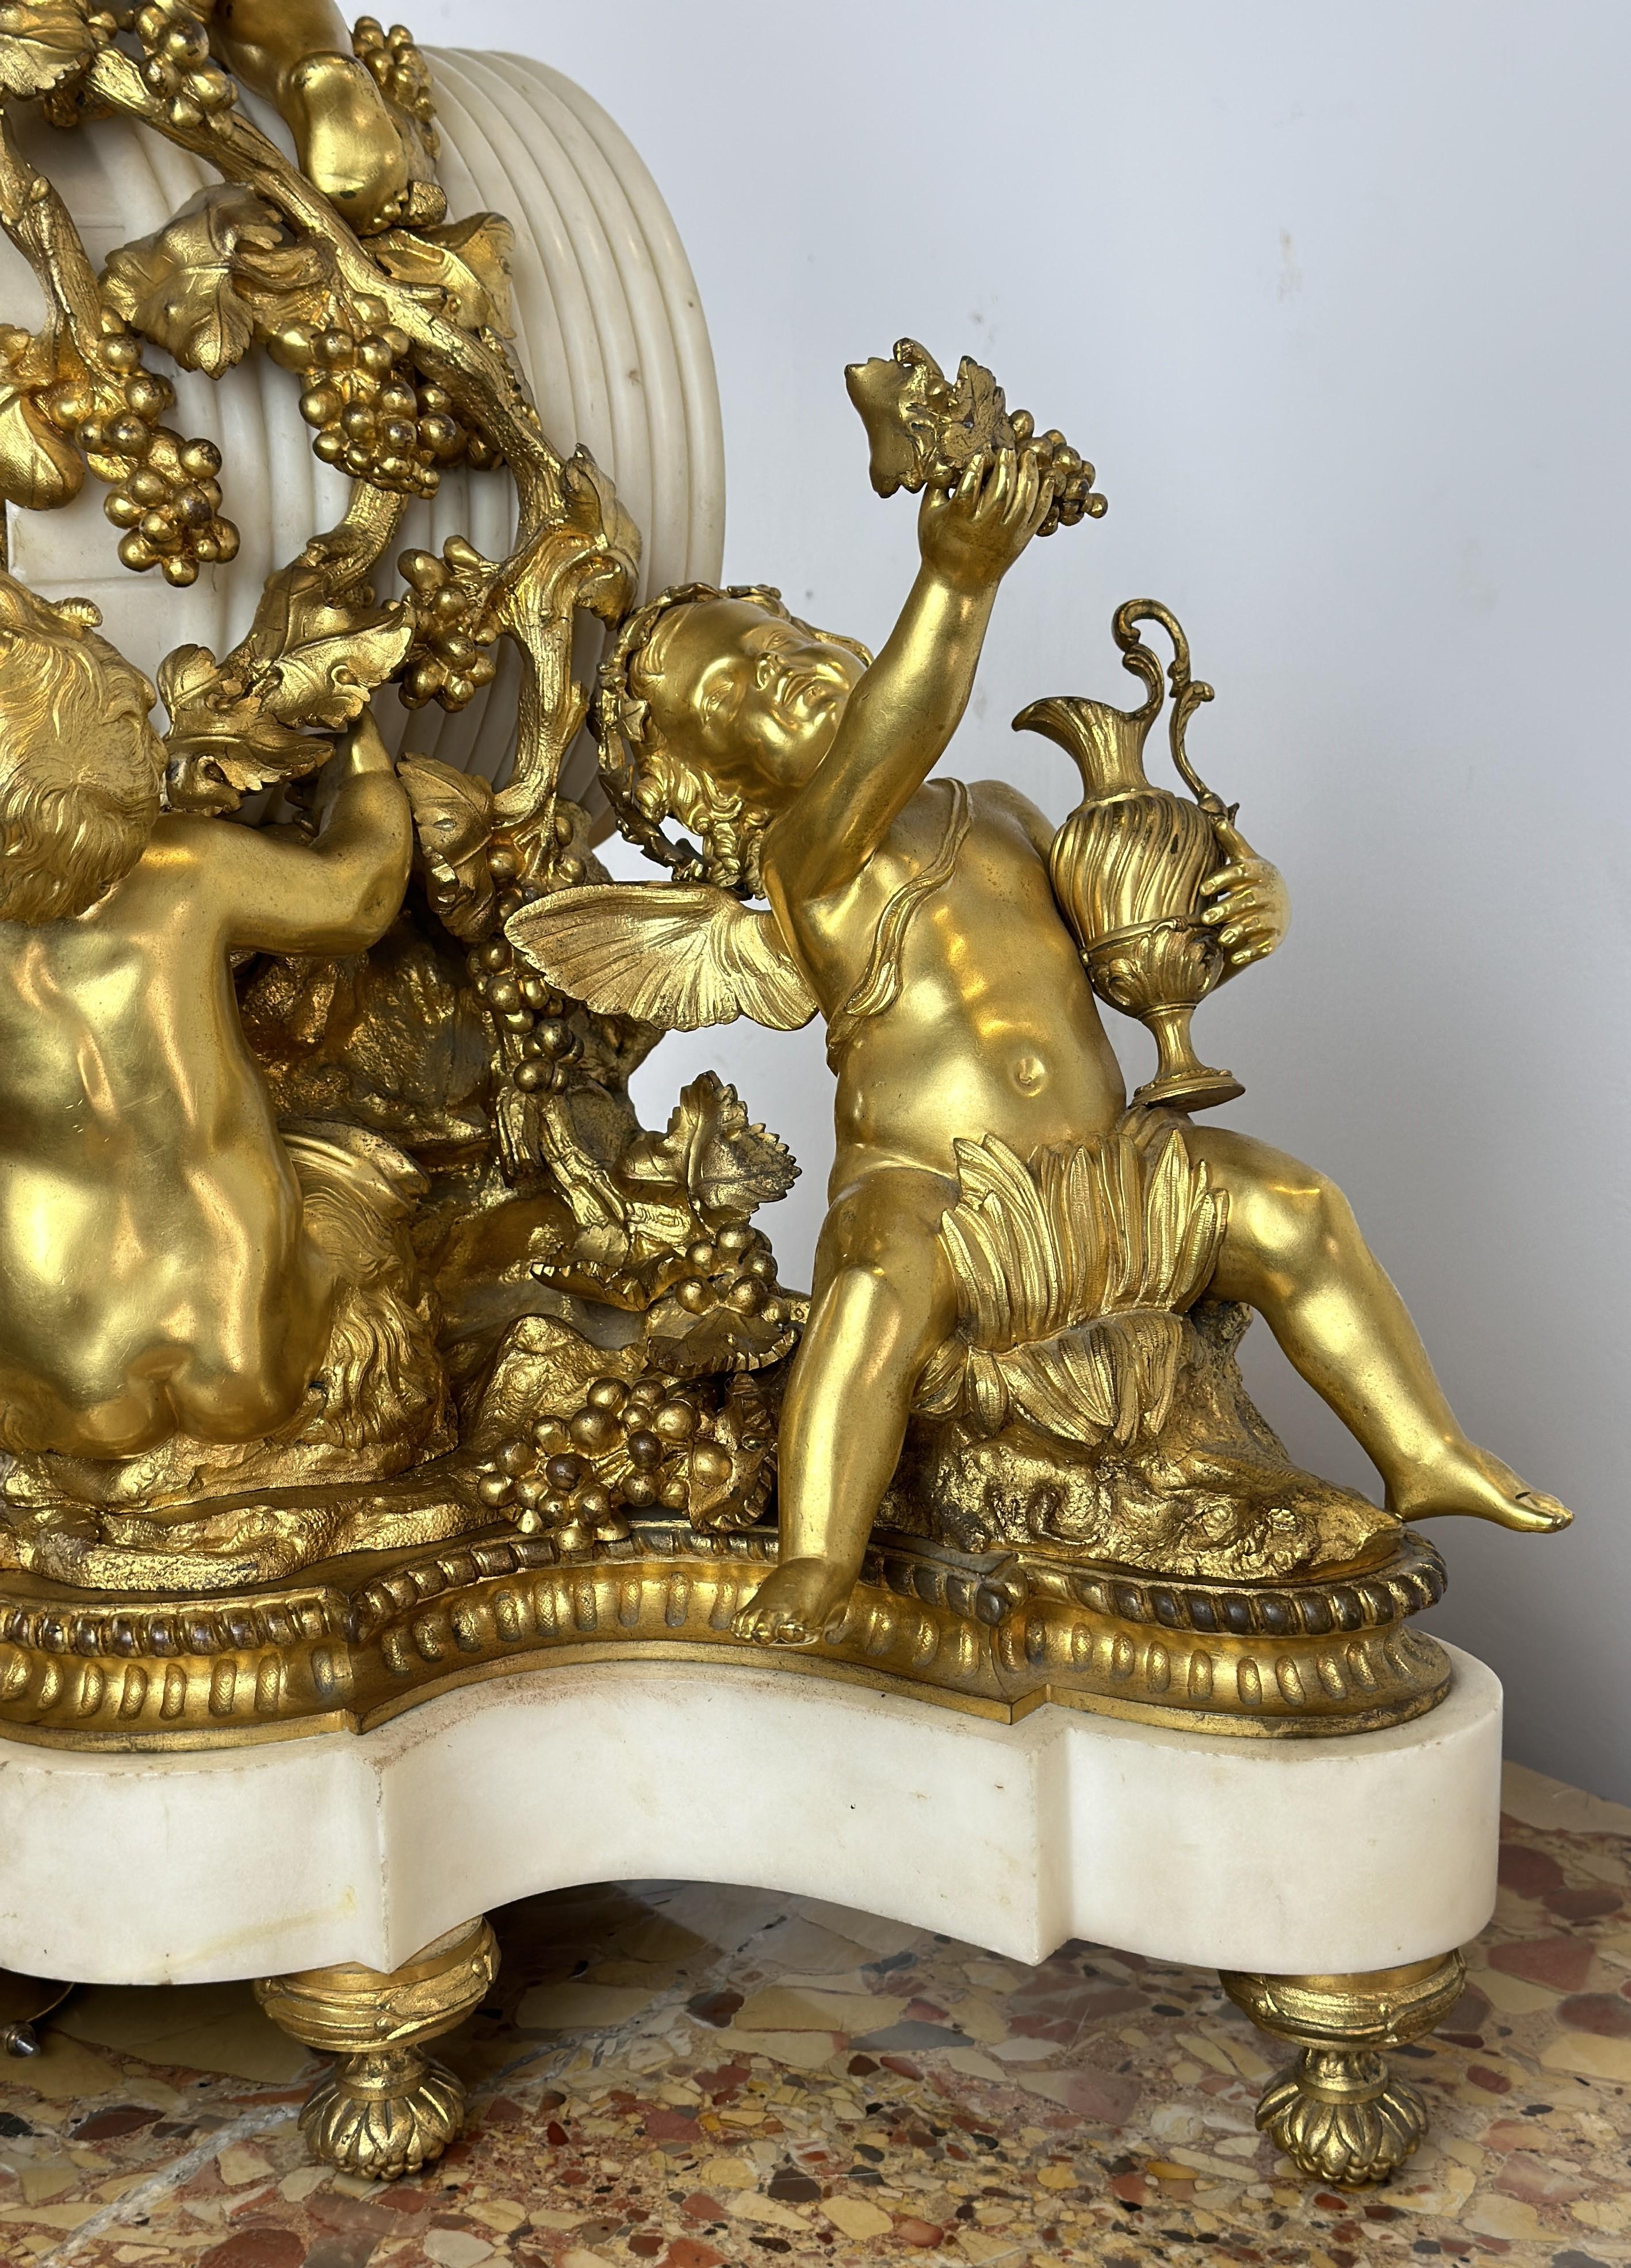 French Important Lerolle Freres Clock 5 Putti Figures 19th Century For Sale